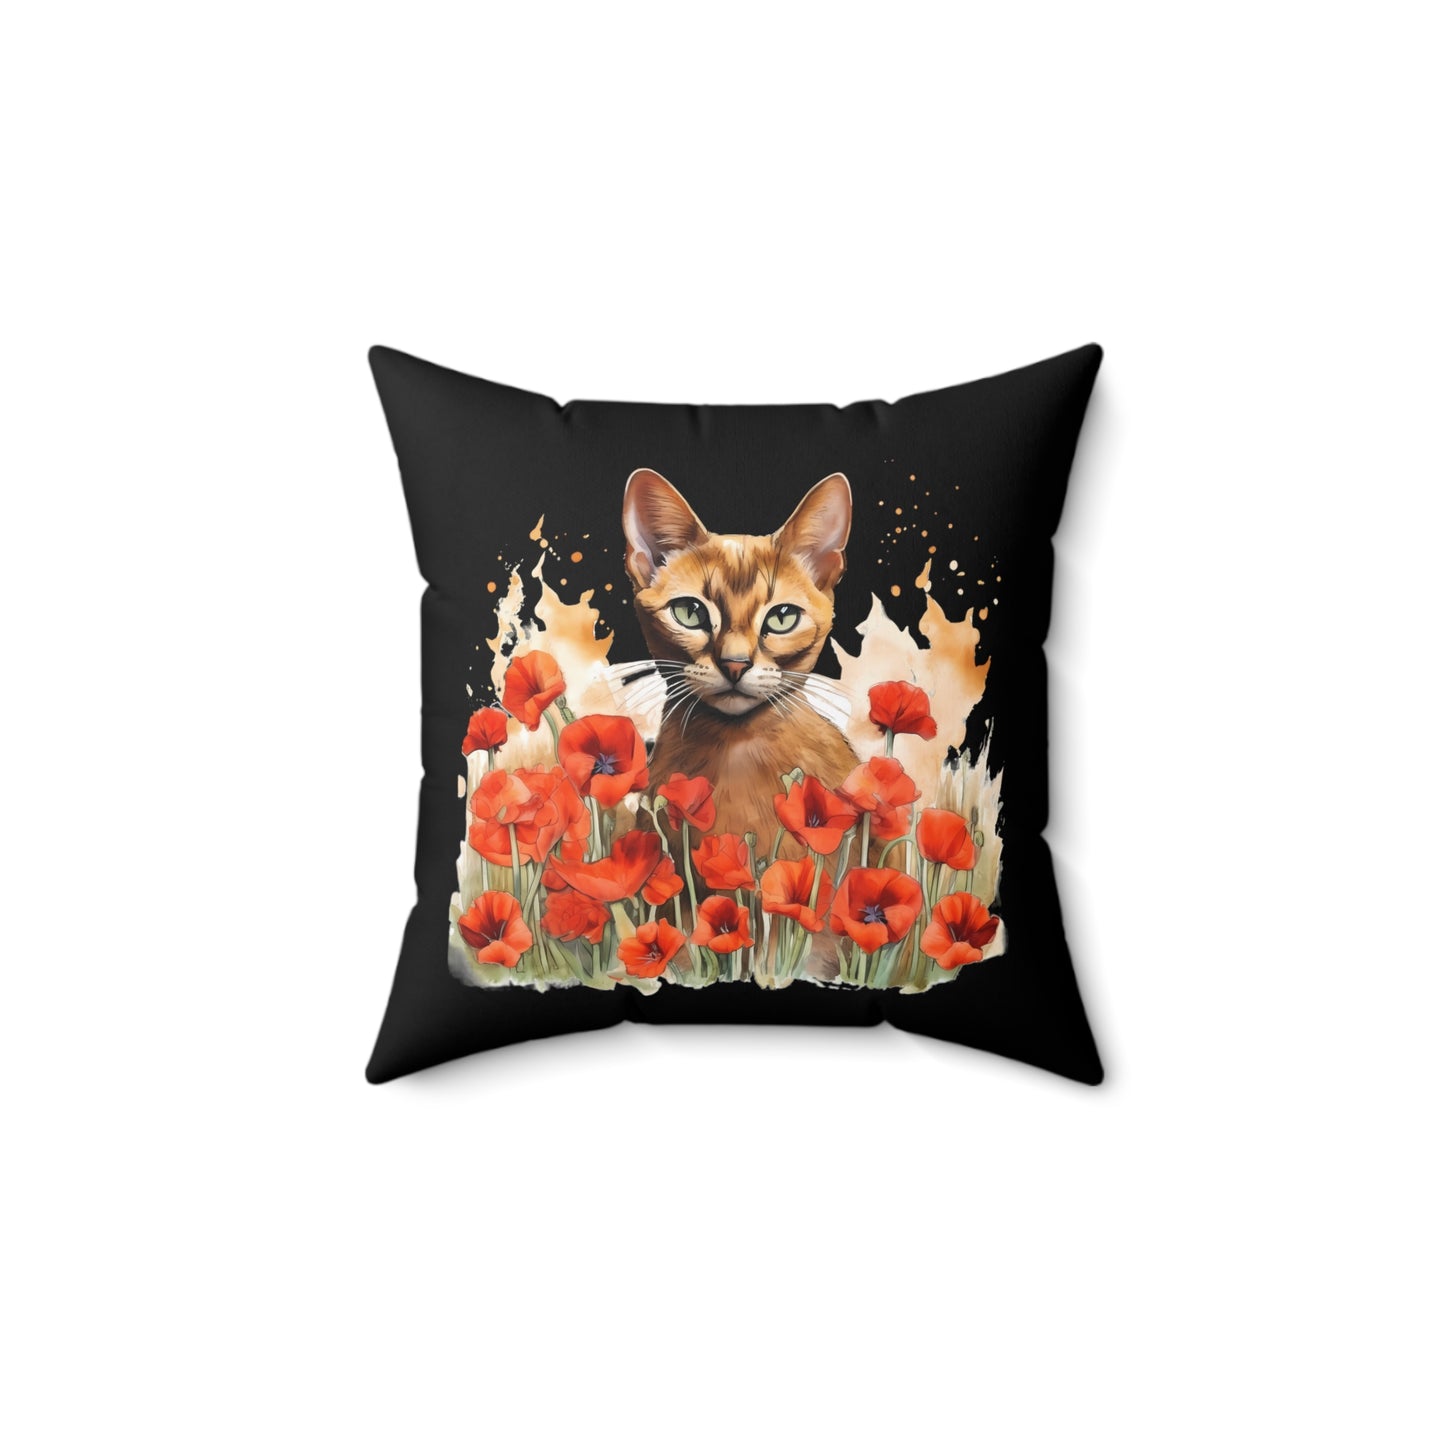 Tabby Cat Square Throw Pillow